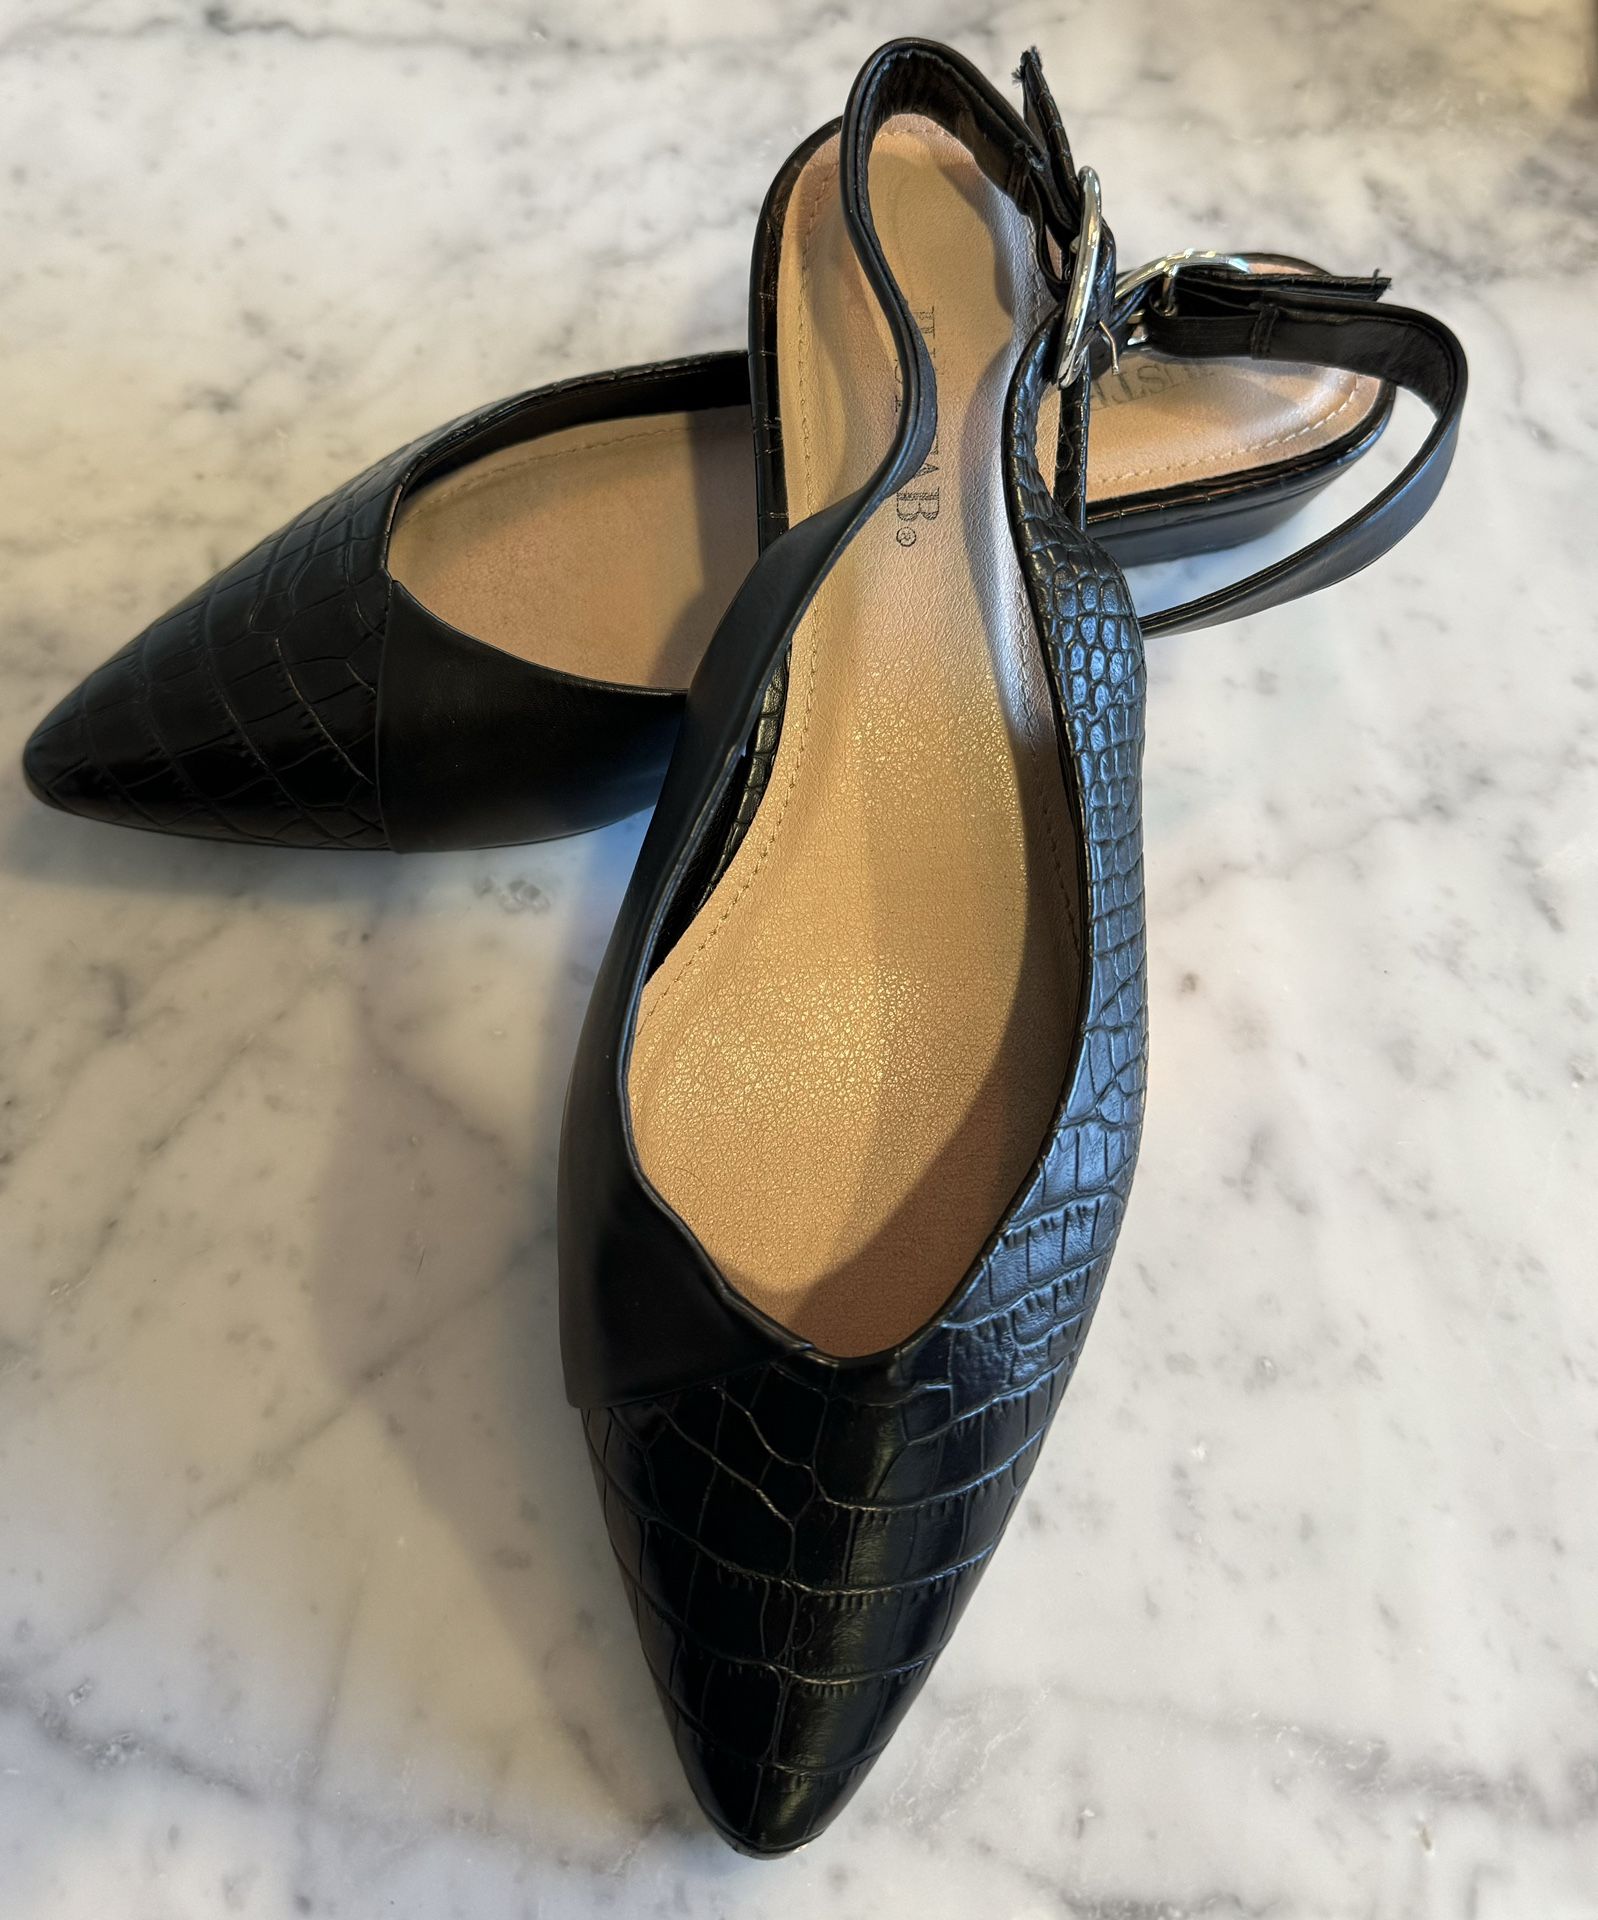 Only worn once women's black flats size 8.5